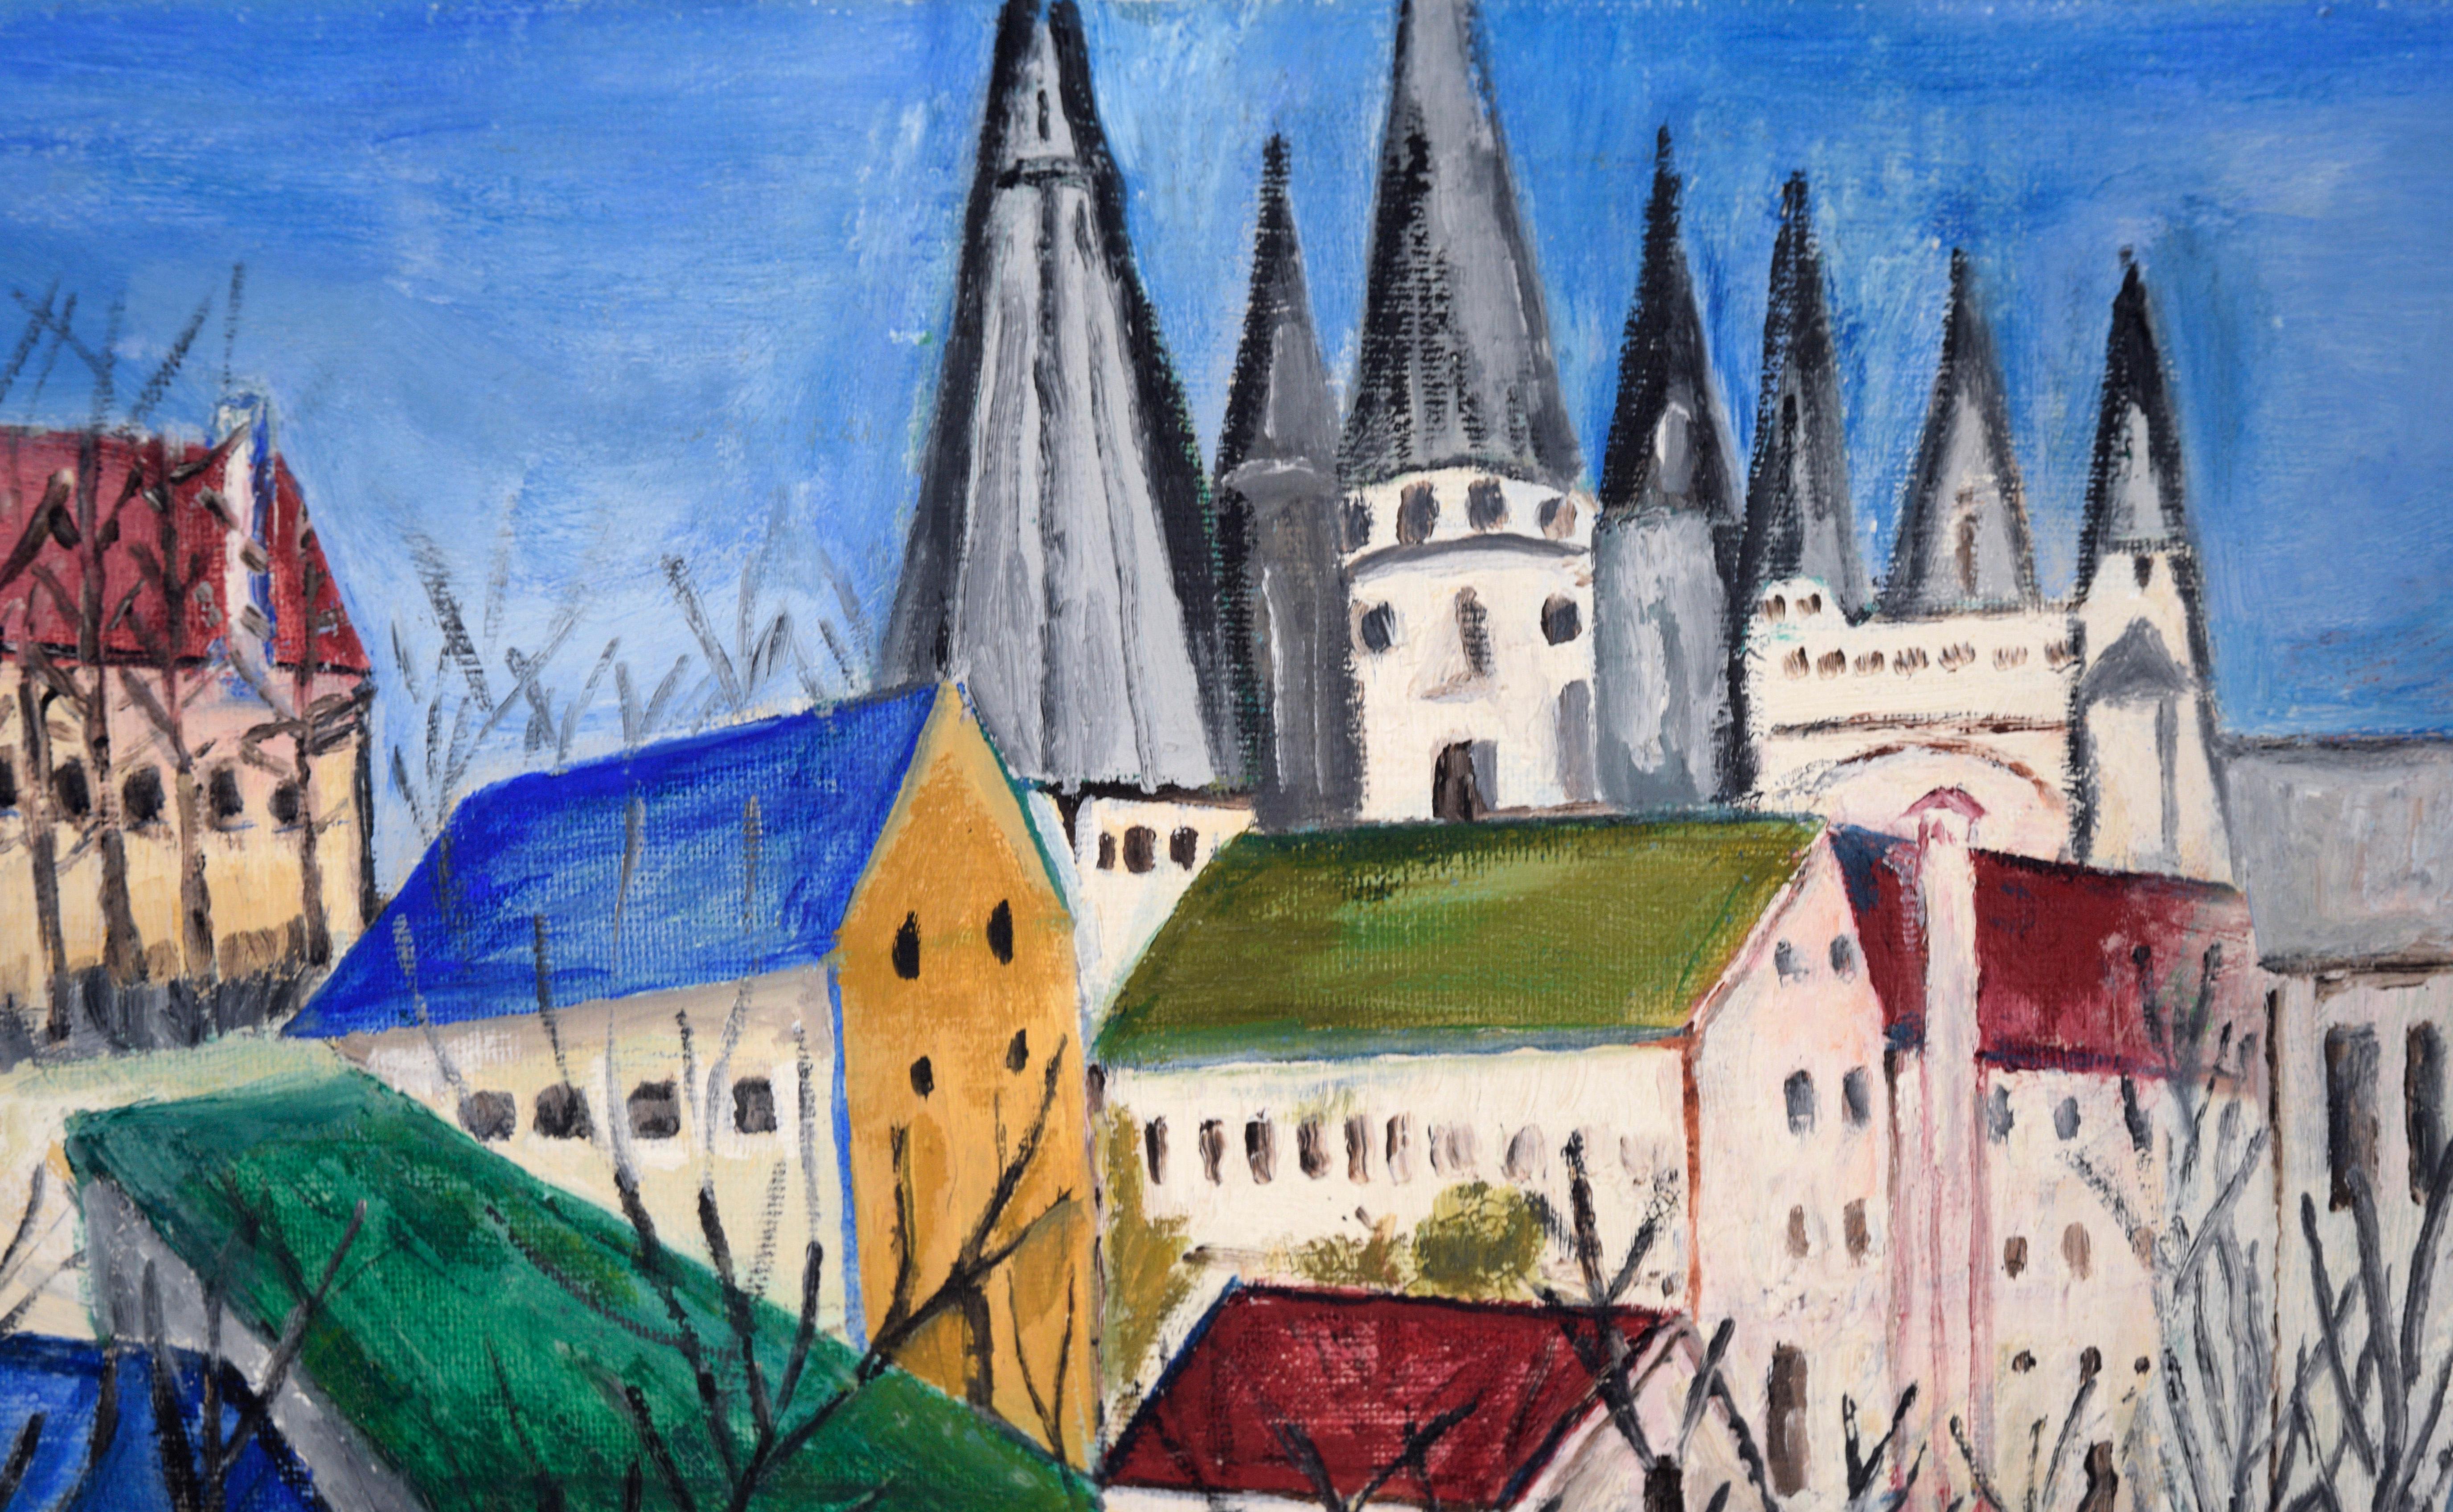 View of the Towers of Chartres Cathedral in Acrylic on Artist's Board - Folk Art Painting by Benjamin Venezky